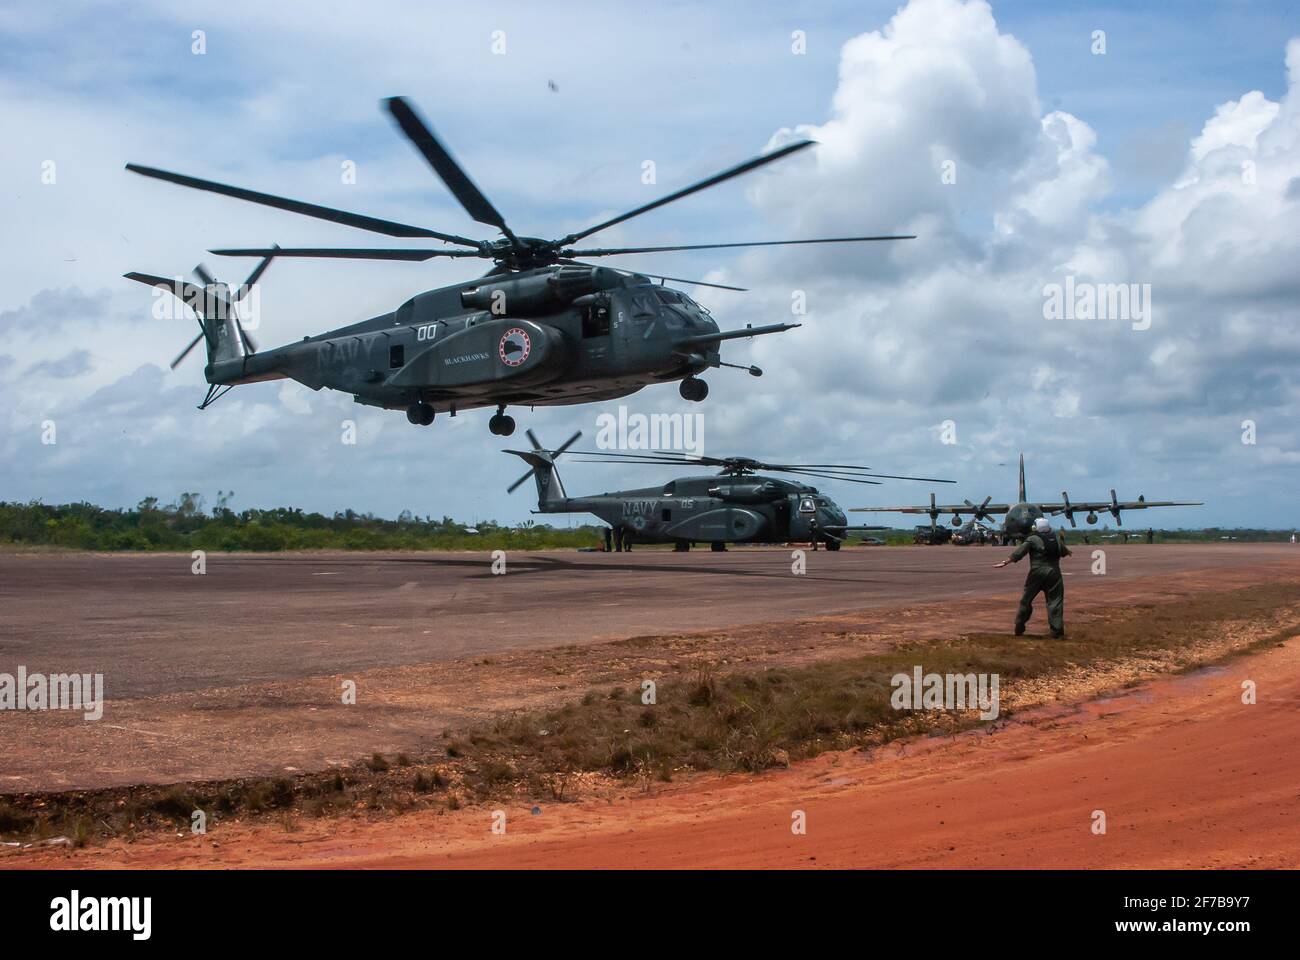 Sandy Bay, Nicaragua. 03-15-2016. Military helicopter returning from reviewing the situation of a community of Puerto Cabezas seriously affected by st Stock Photo